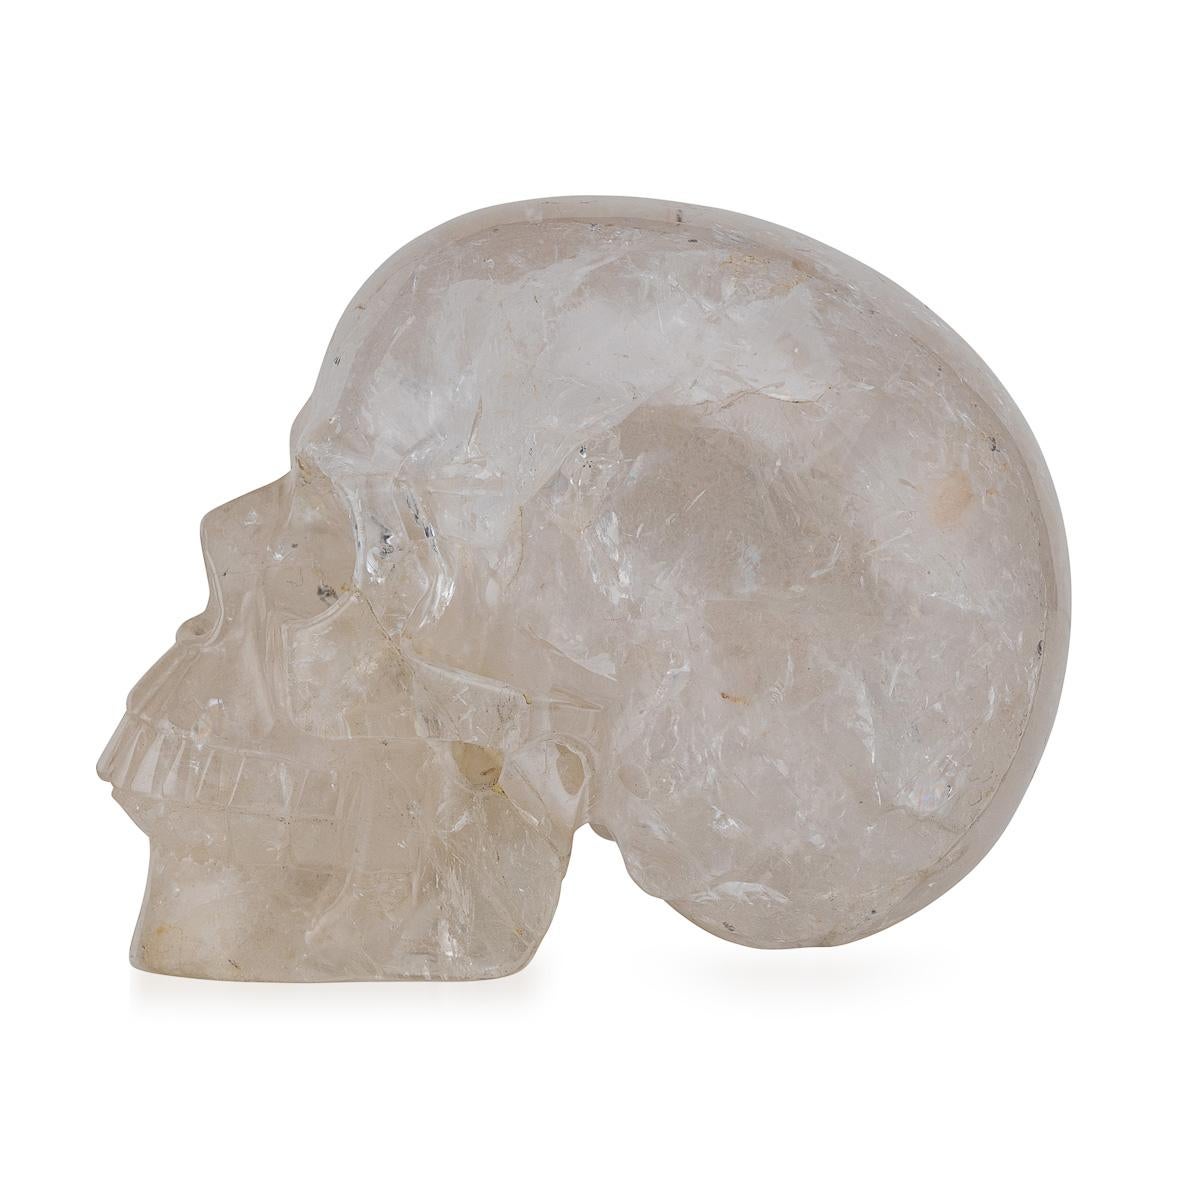 Mid 20th Century hand carved crystal skull. Crystal skulls are intriguing and often mystifying artefacts crafted from various types of crystal or gemstone, including quartz, amethyst, and more.

CONDITION
In Great Condition - Please refer to